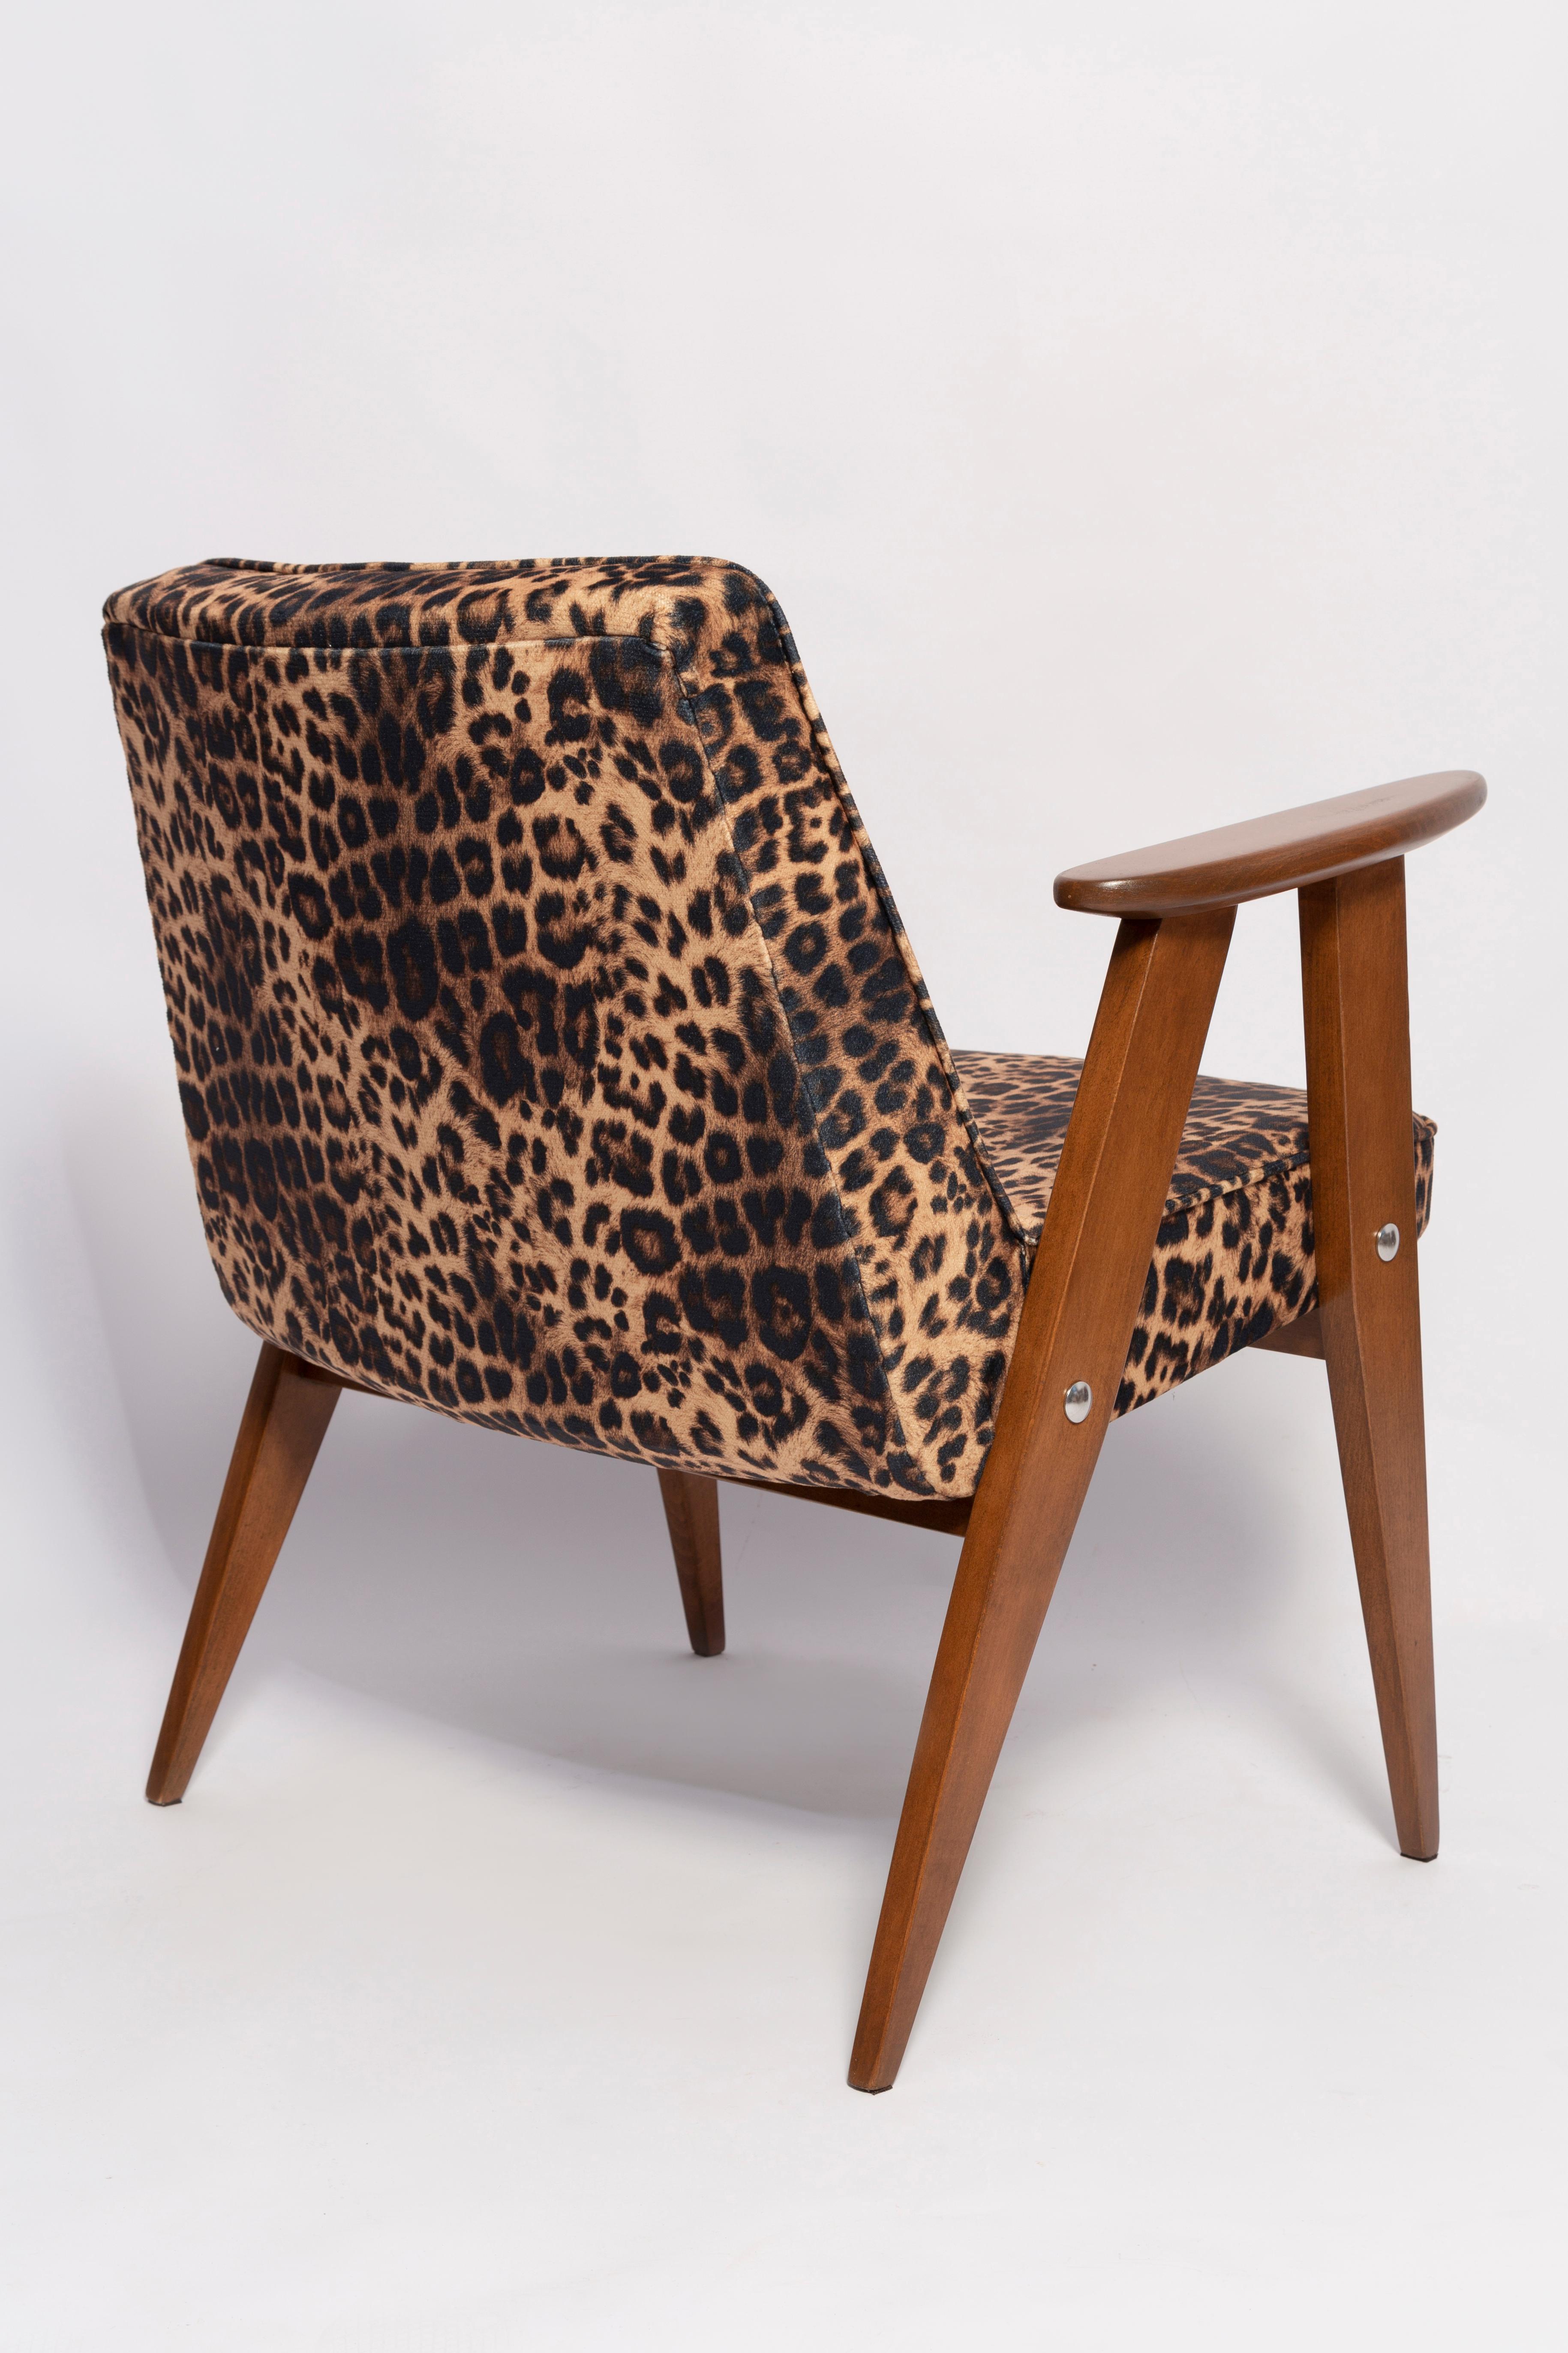 20th Century Mid-Century 366 Armchair in Leopard Print Velvet, Jozef Chierowski, Europe 1960s For Sale